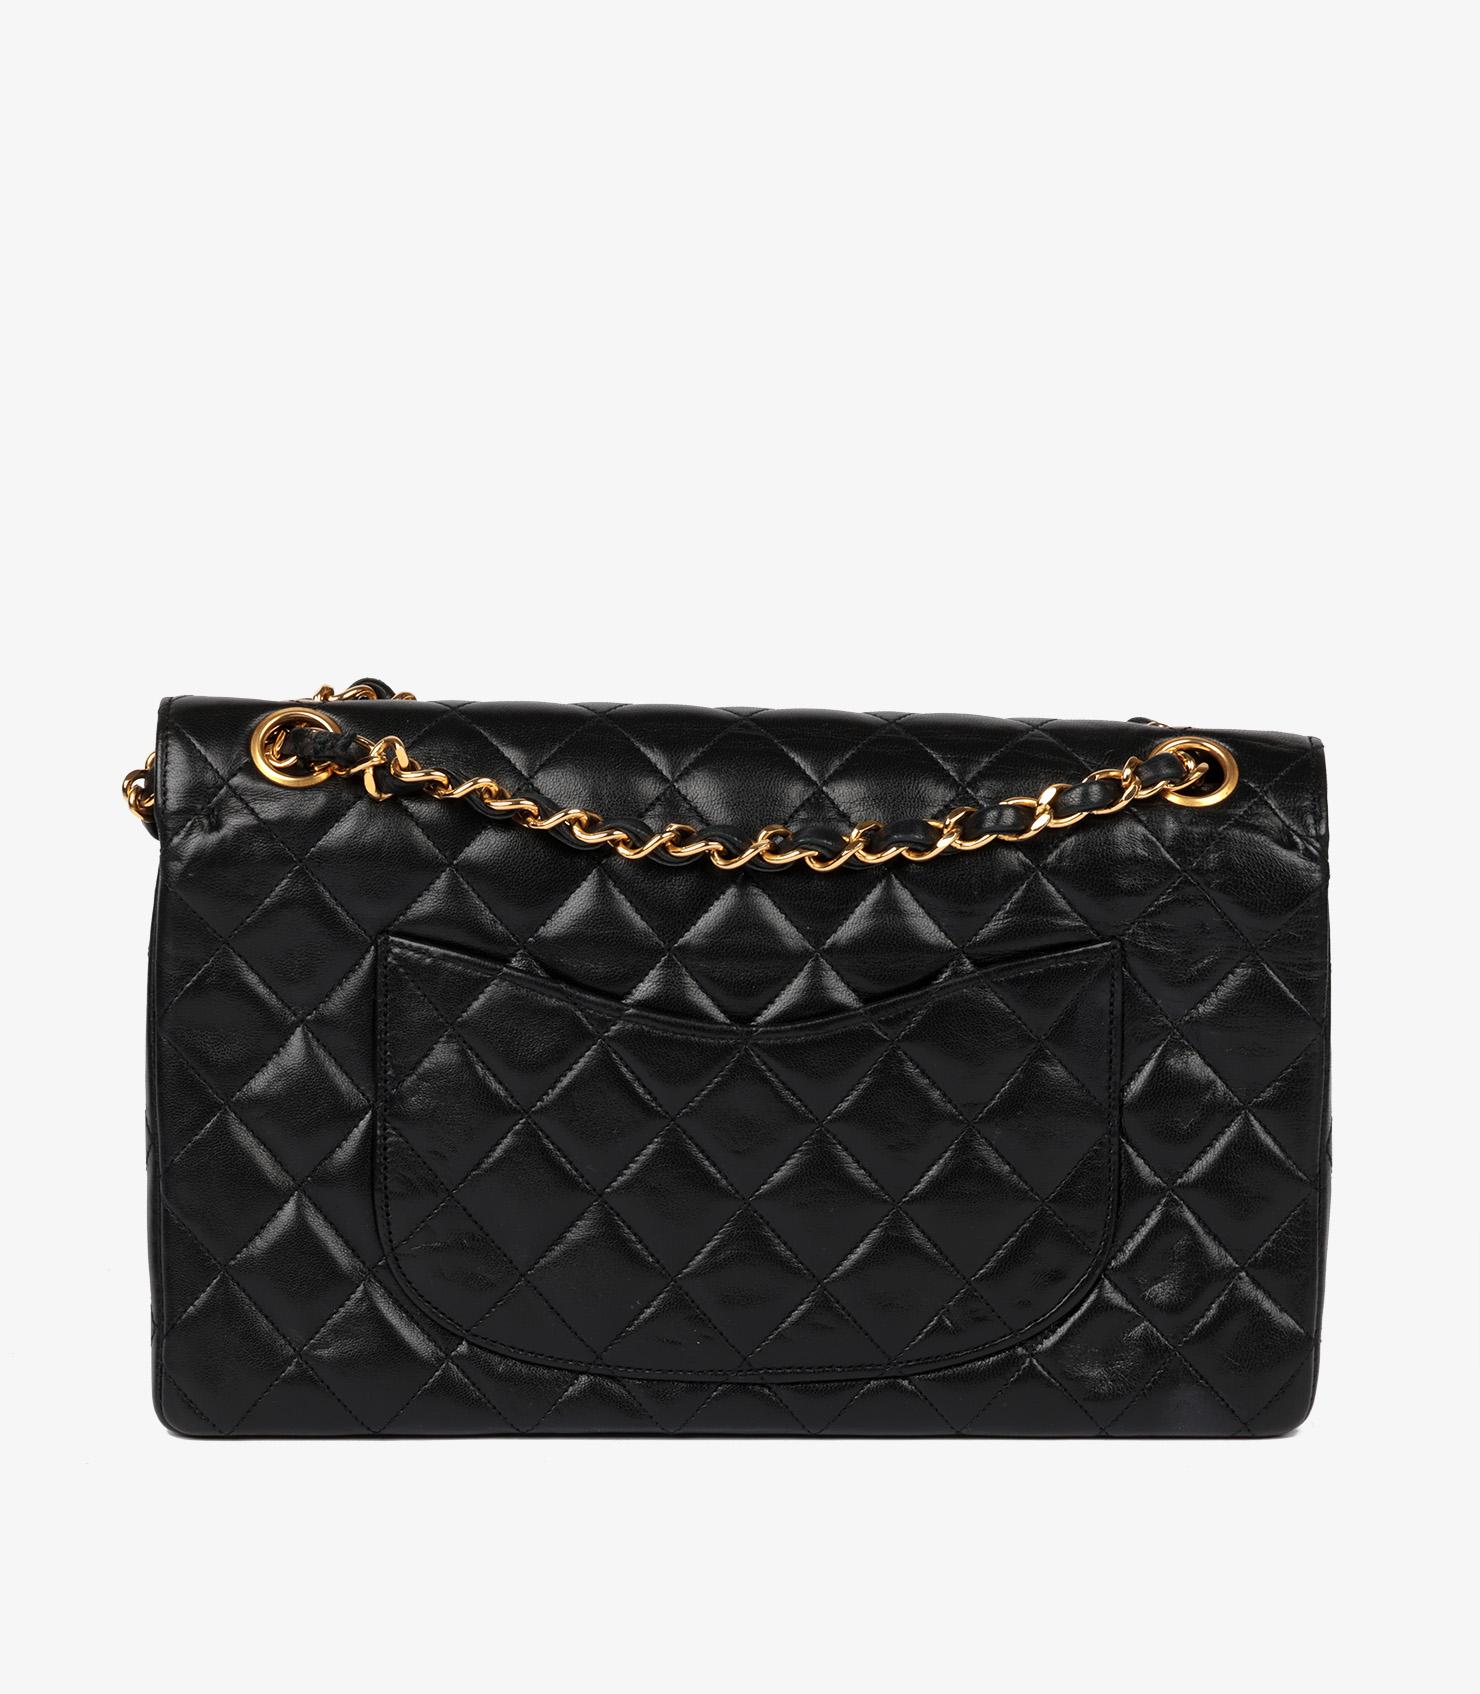 Chanel Black Quilted Lambskin Vintage Medium Classic Double Flap Bag 1